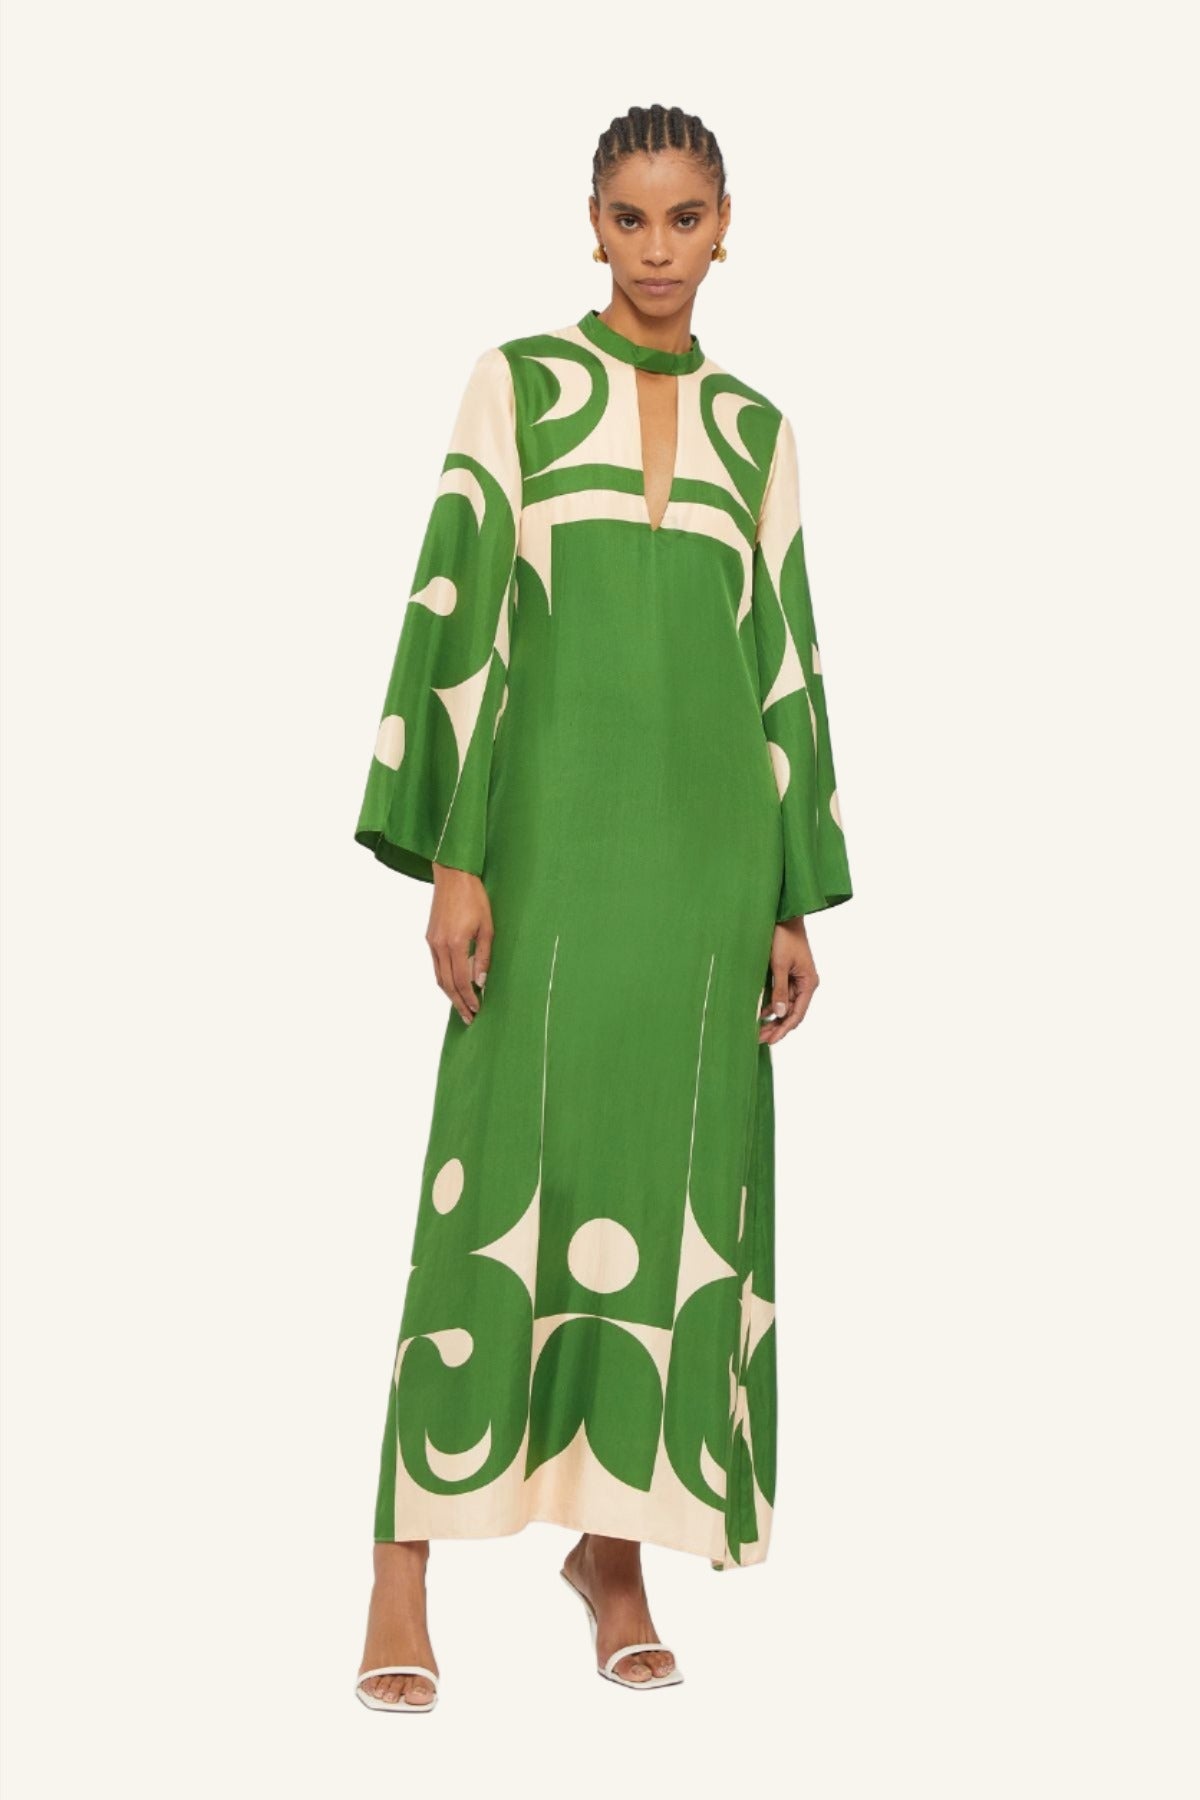 Emerald Green & Cream deco printed long silk gown crafted by Australian fashion designer GINGER & SMART